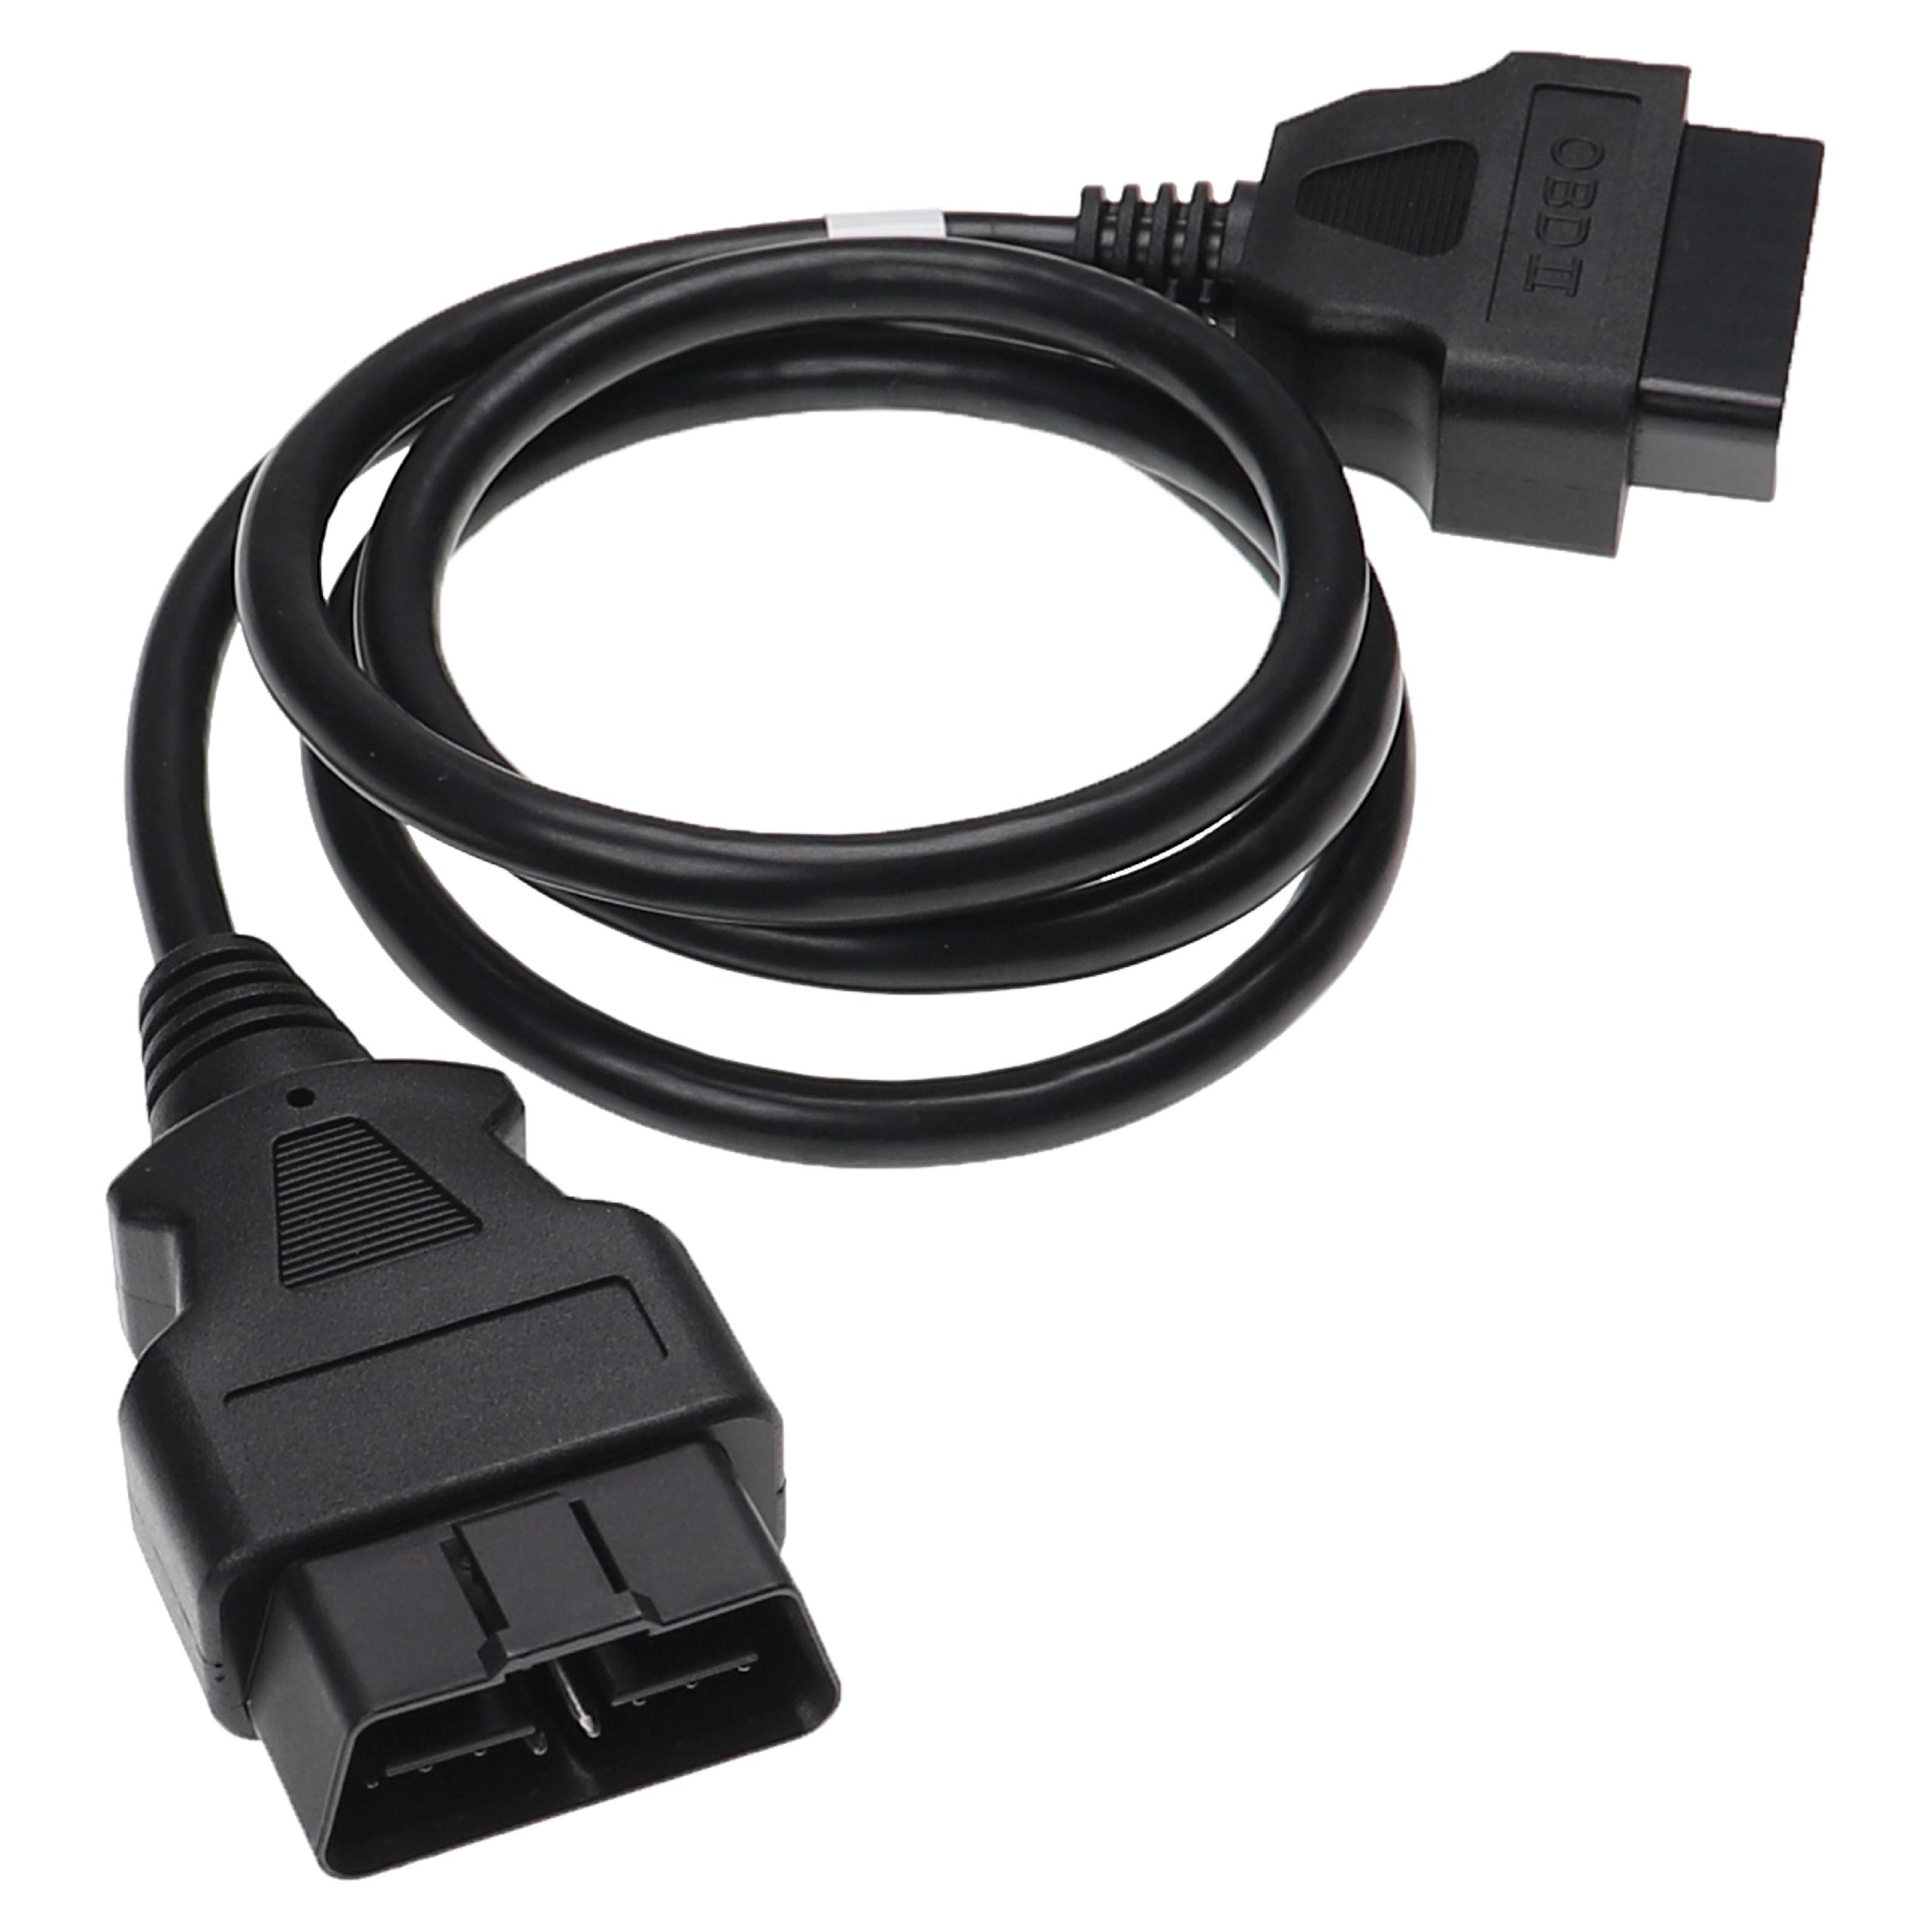 vhbw OBD2 Extension Cable 16 Pin (f) to 16 Pin (m) for LKW, Car, Vehicle - 100 cm